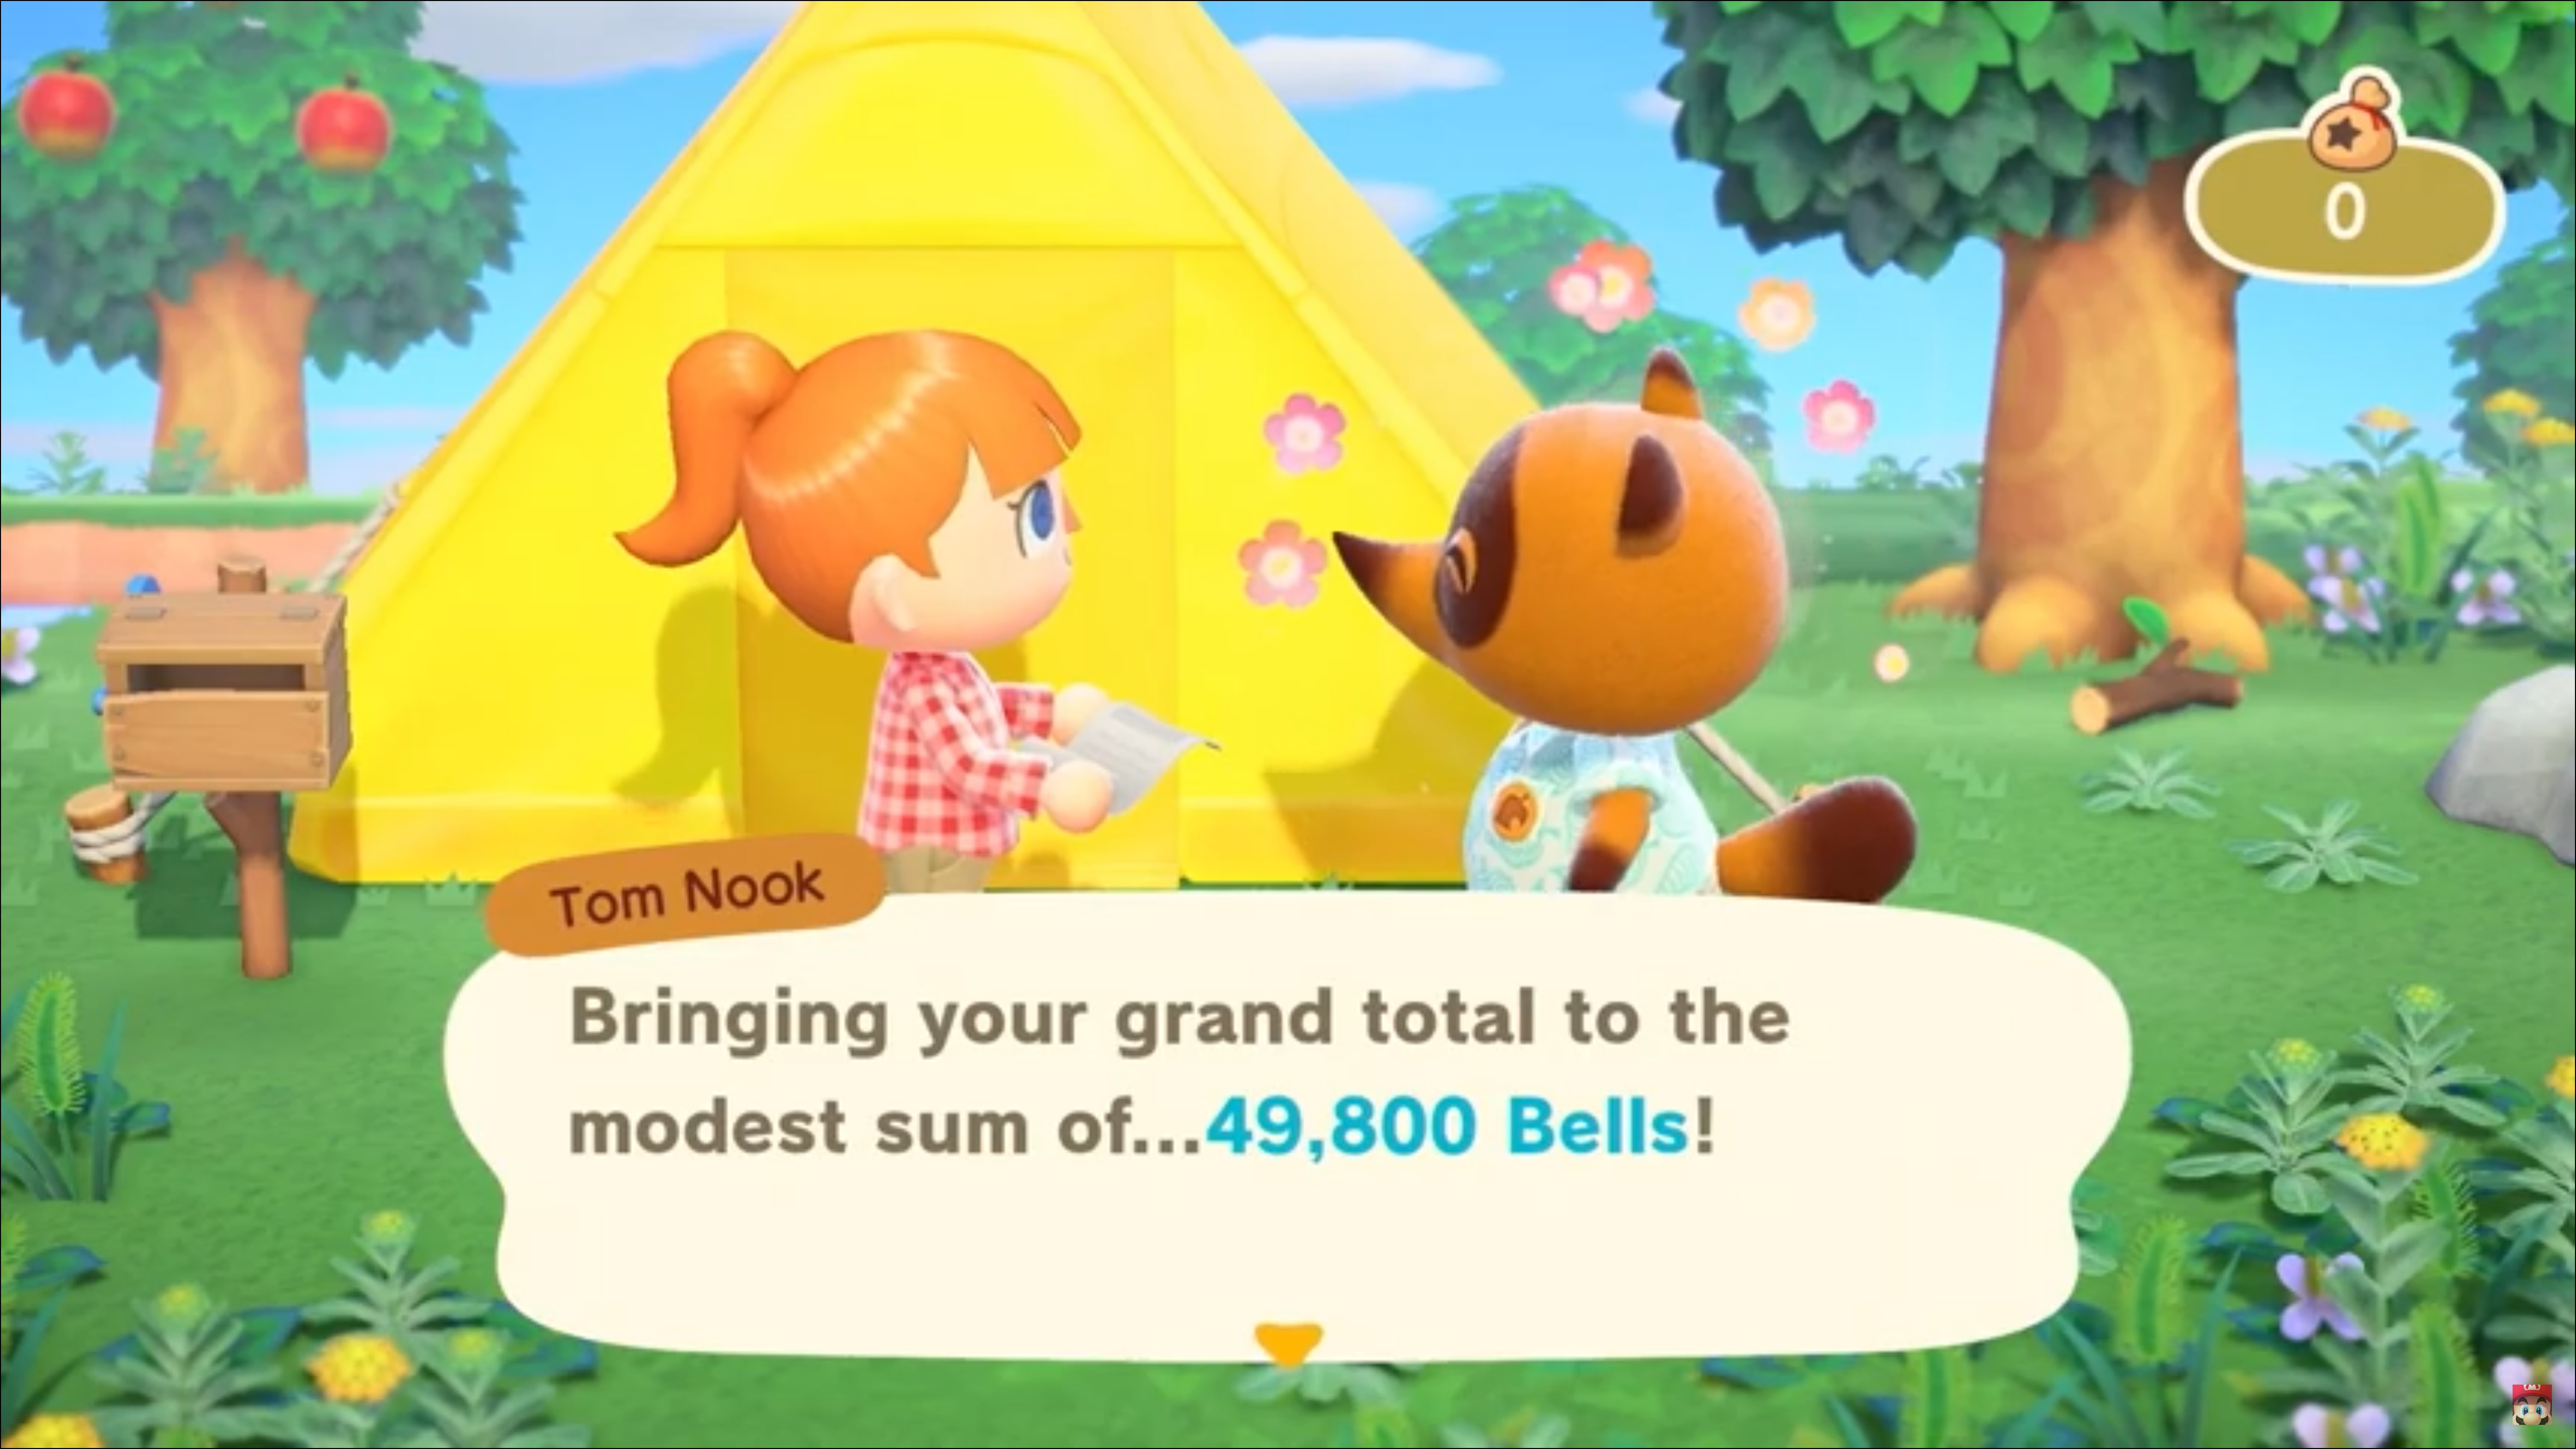 when did animal crossing new horizon come out